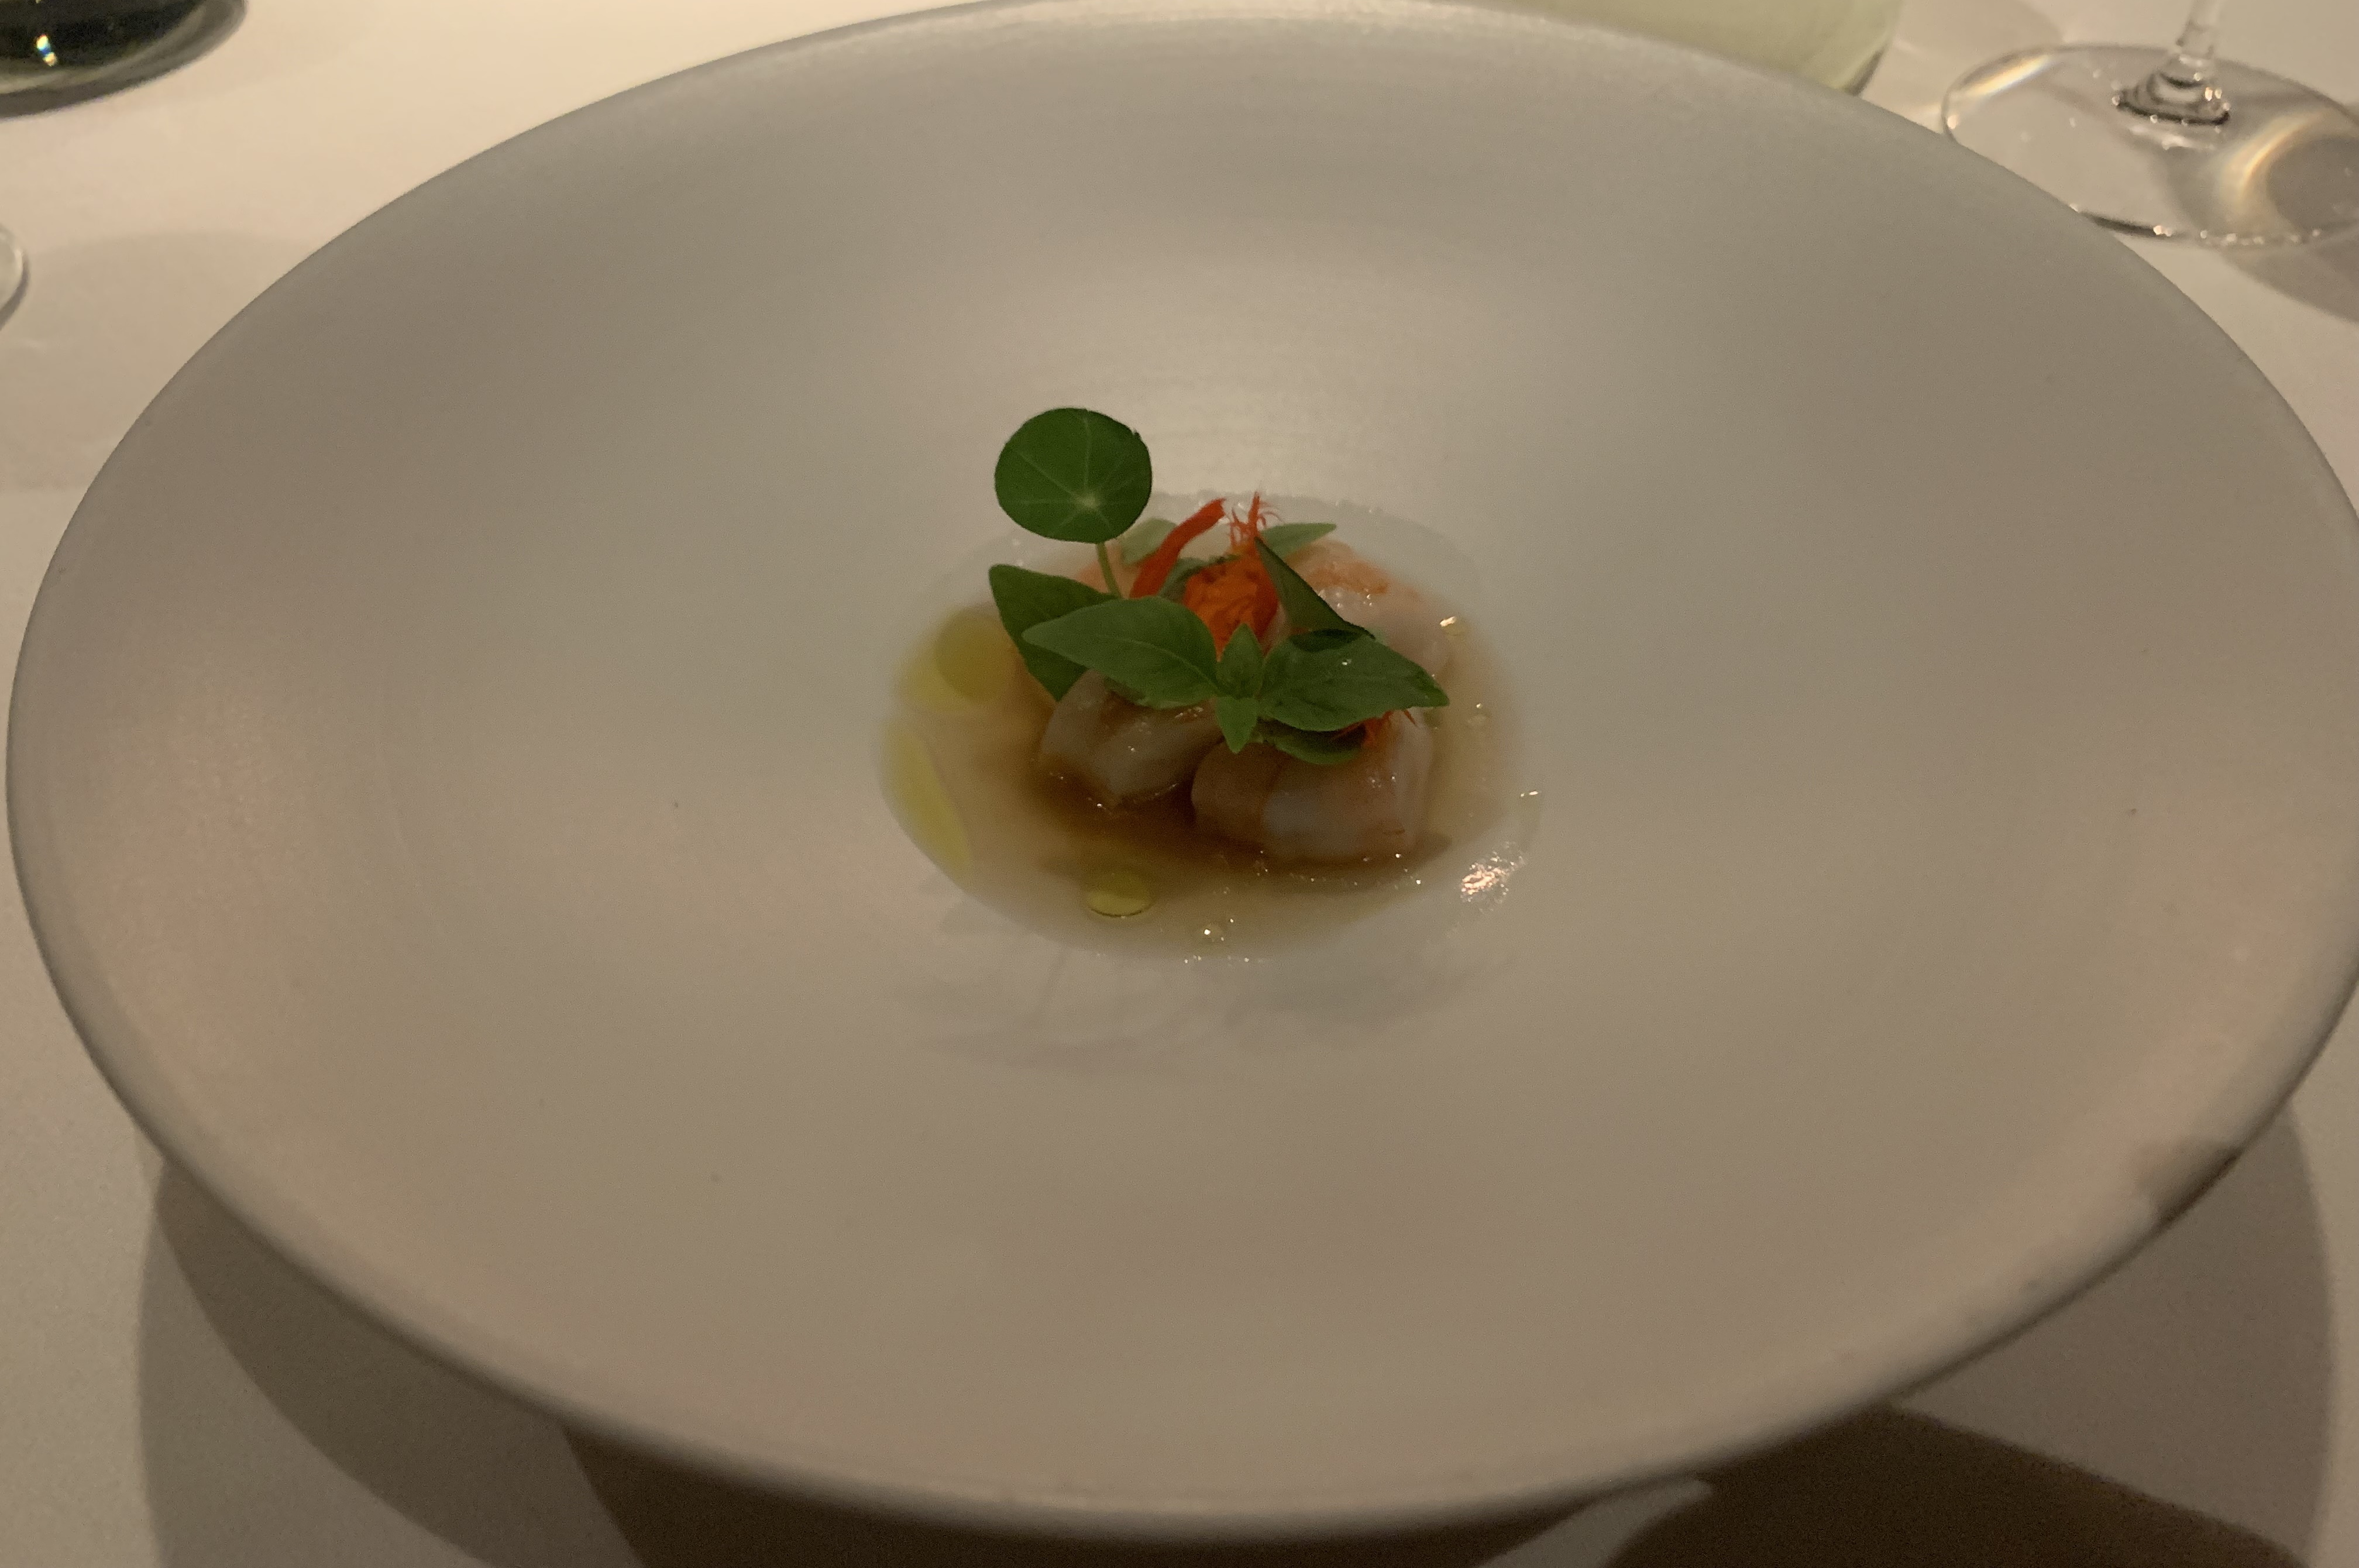 Very large white plate, with a tiny circle of golden broth in the center. In the broth are a few chunks of cut-up prawns, garnished with some green leaves and a red flower.